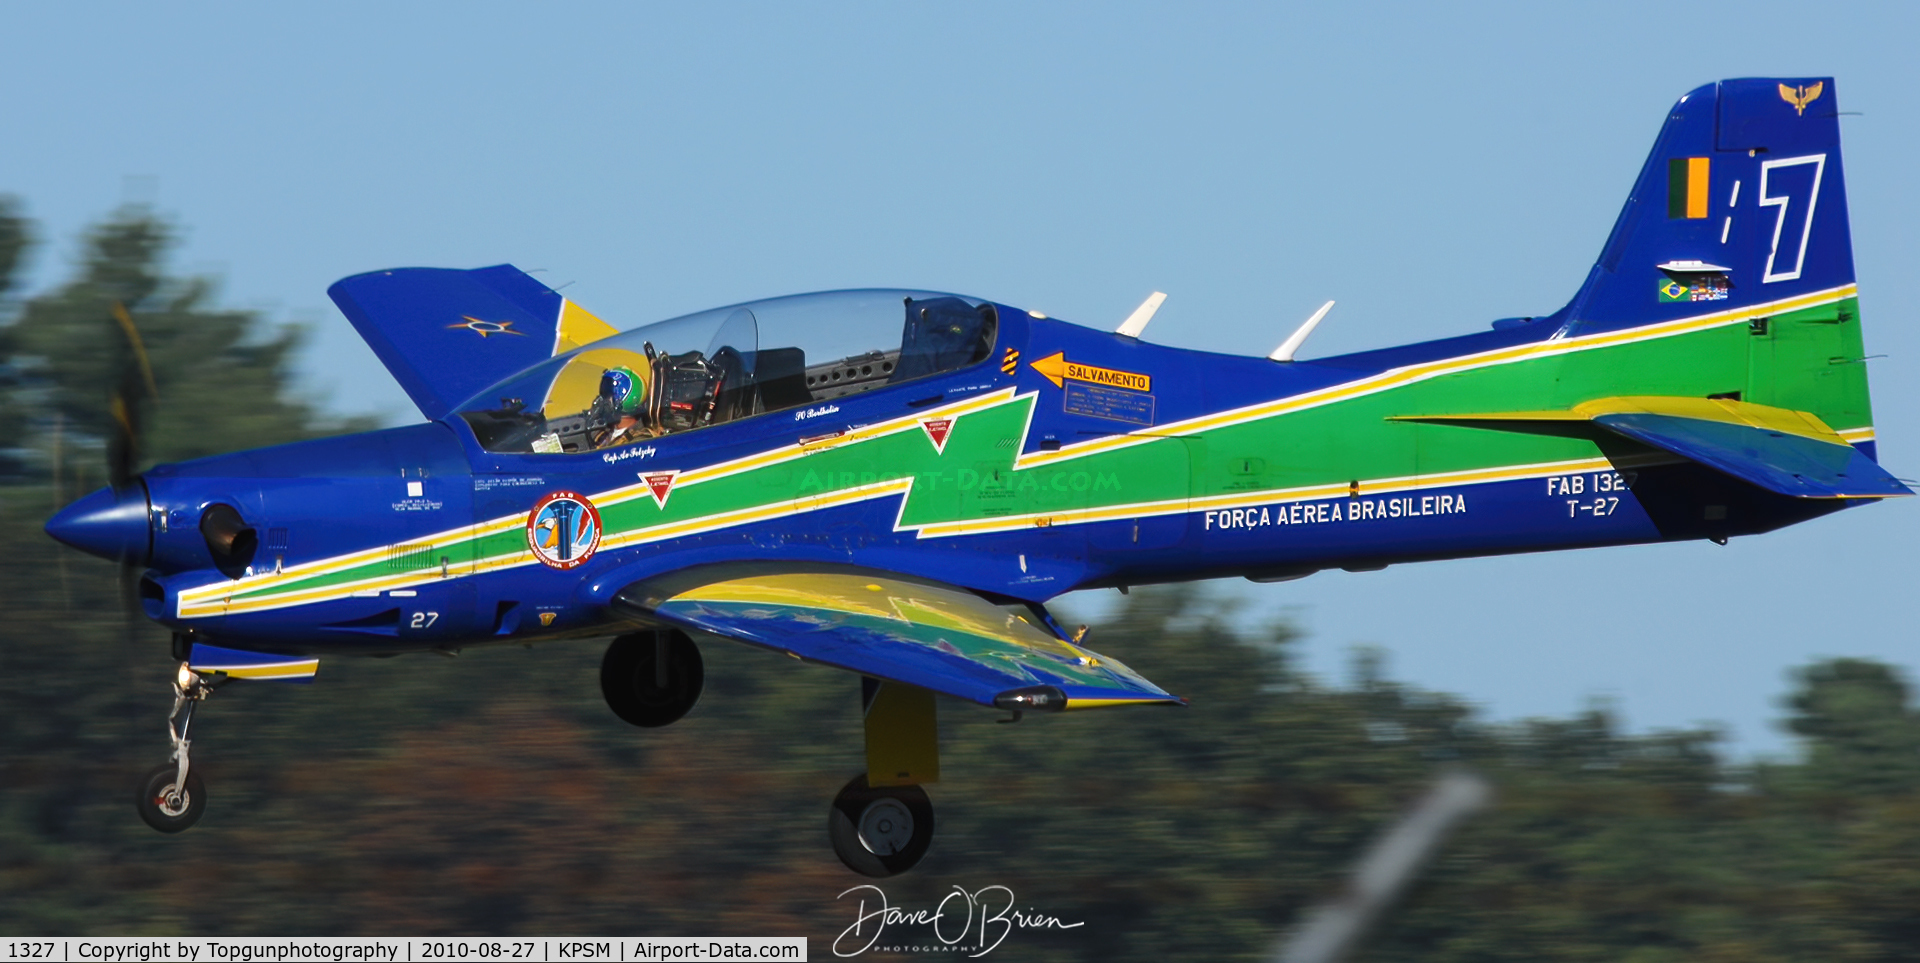 1327, Embraer T-27 Tucano (EMB-312) C/N 312031, tip of the wing